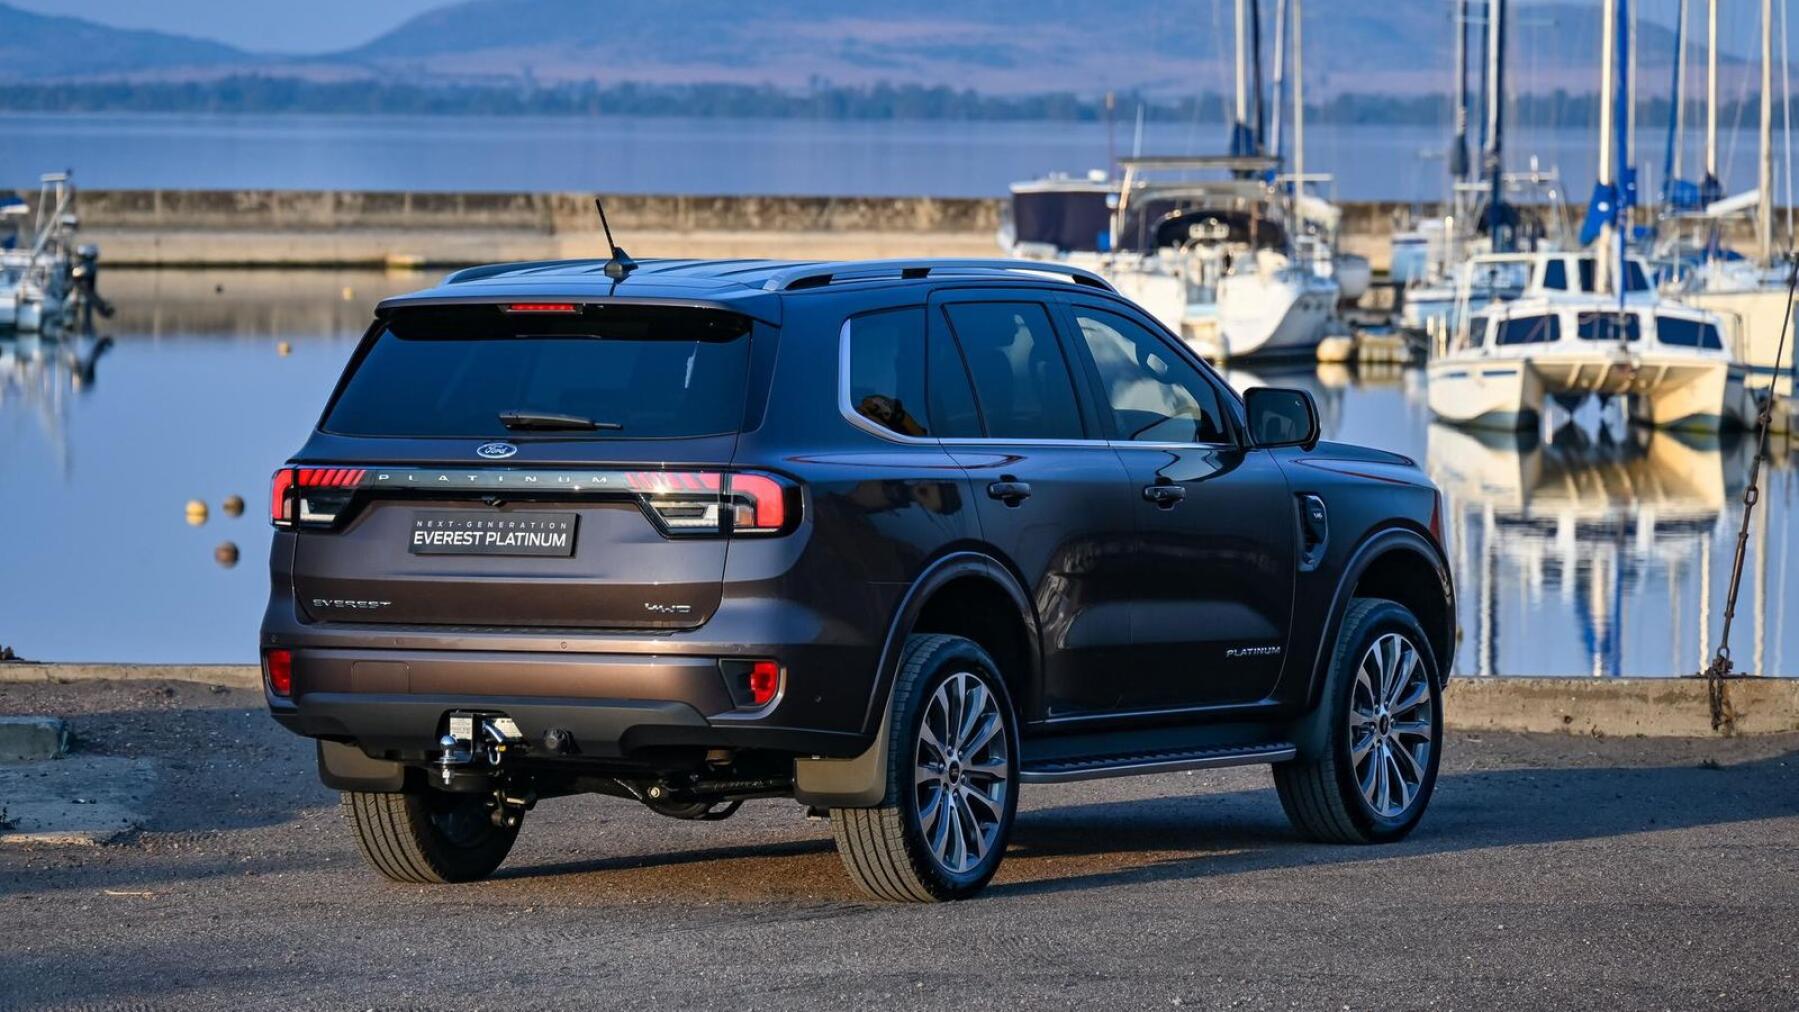 2022 Ford Everest Platinum rear view